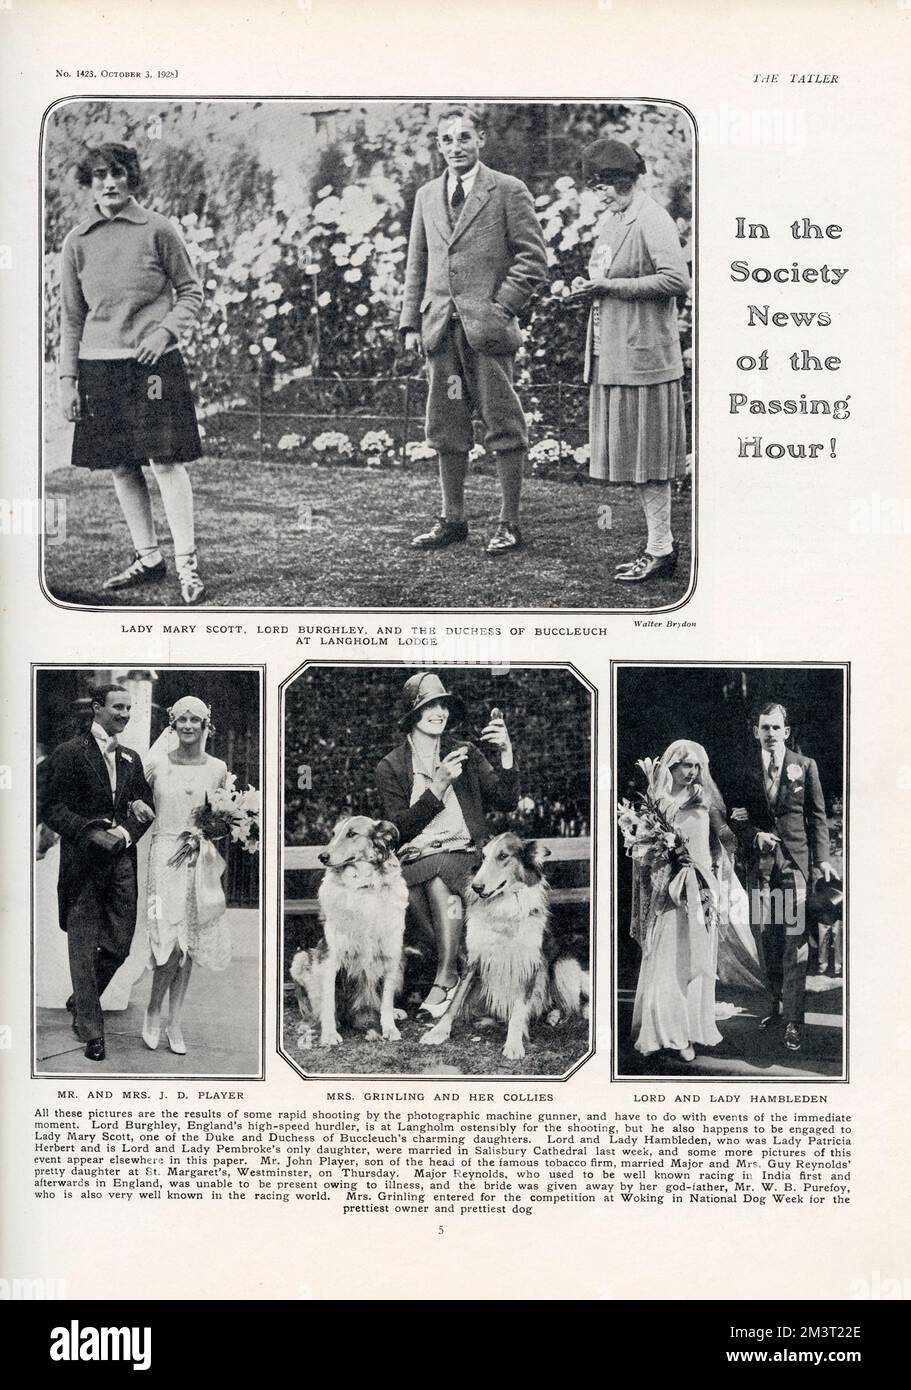 In the Society News of the Passing Hour! Lady Mary Scott and Lord Burghley (who are engaged), and the Duchess of Buccleuch at Langholm Lodge; Mr and Mrs J D Player on their wedding day; Mrs Grinling and her collies; Lord and Lady Hambleden on their wedding day. Page from The Tatler, 3rd October 1928. Stock Photo